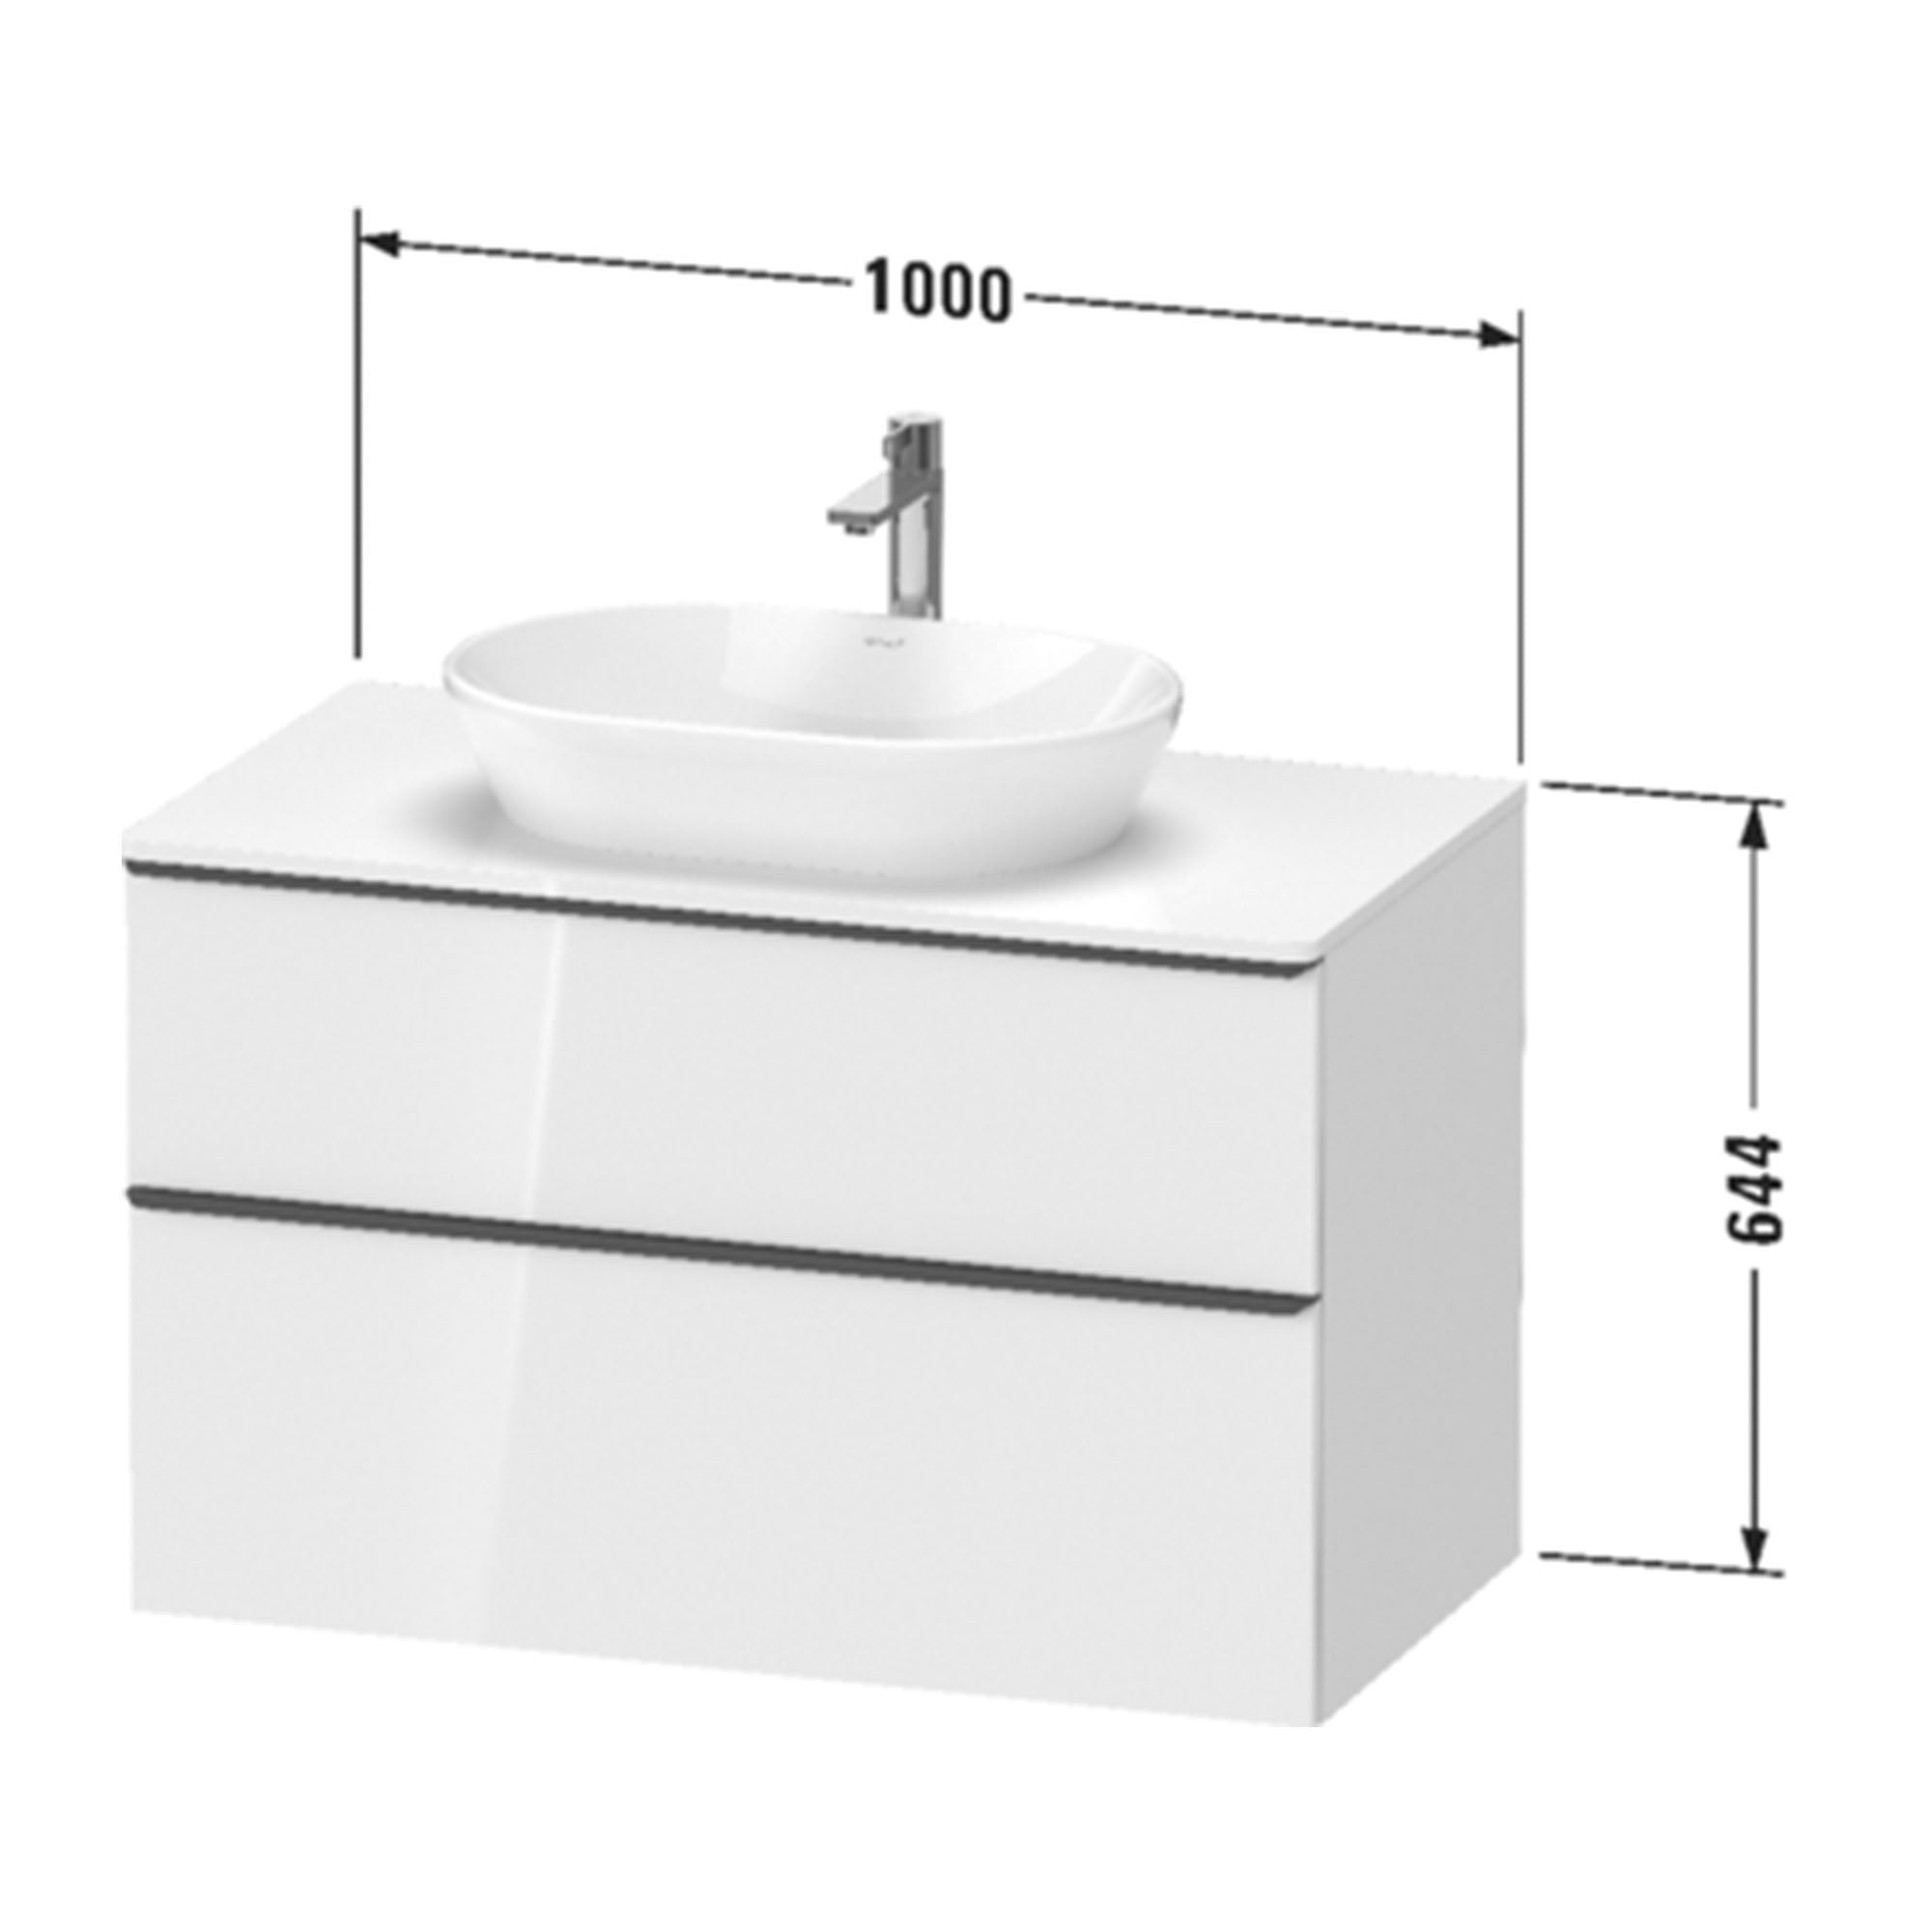 duravit d-neo 1000 wall mounted vanity unit with worktop